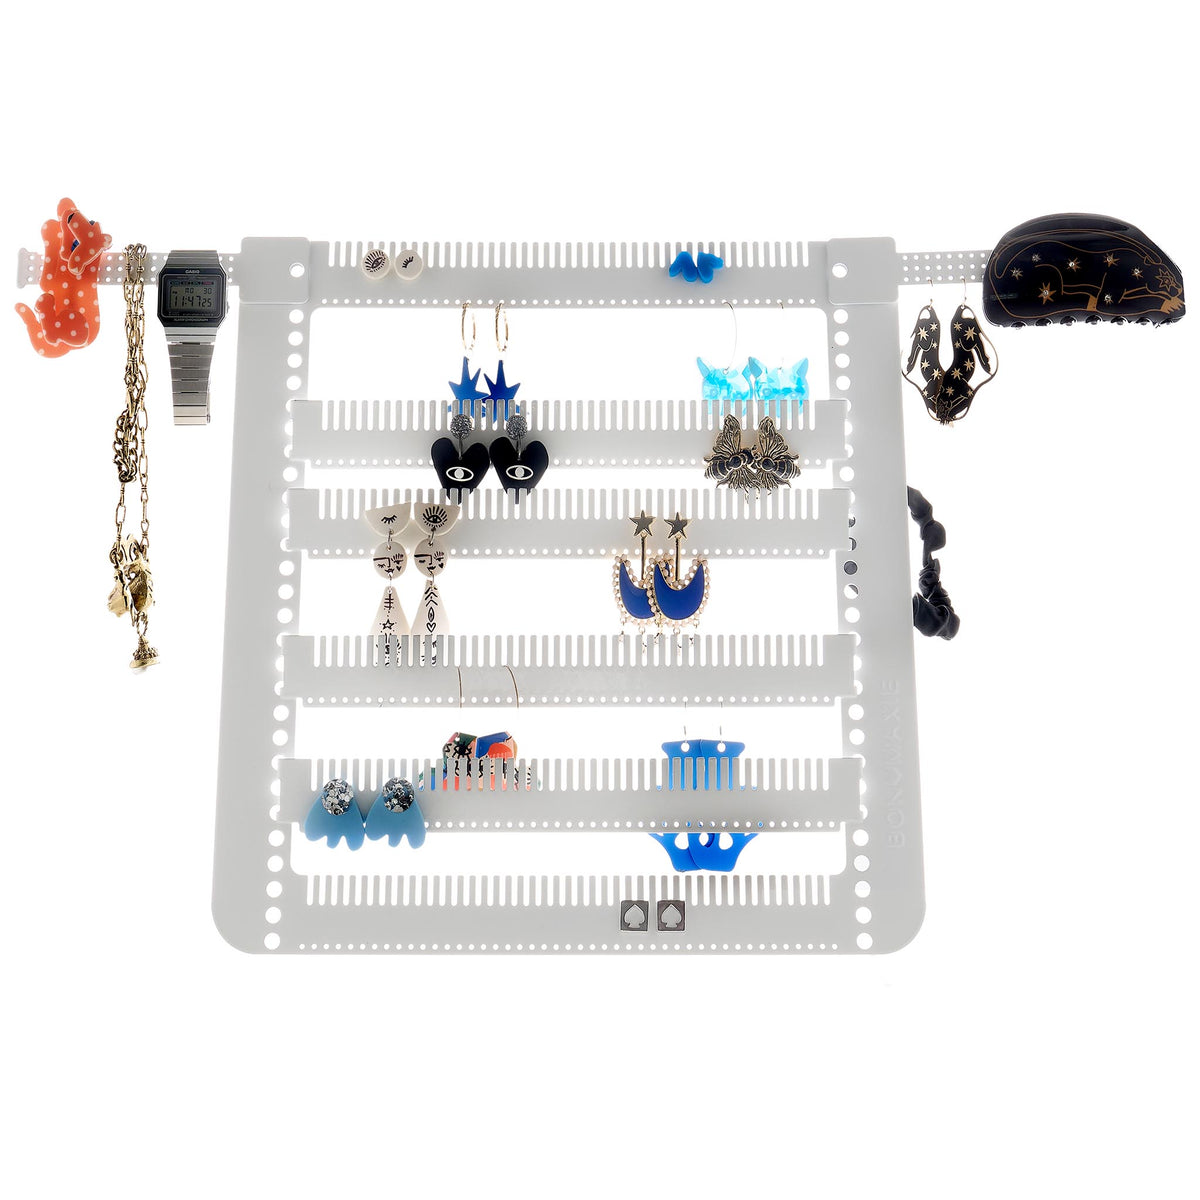 Add-On Side Accessory Bars for Easy-Drop™ Earring Holders - 2 Pack